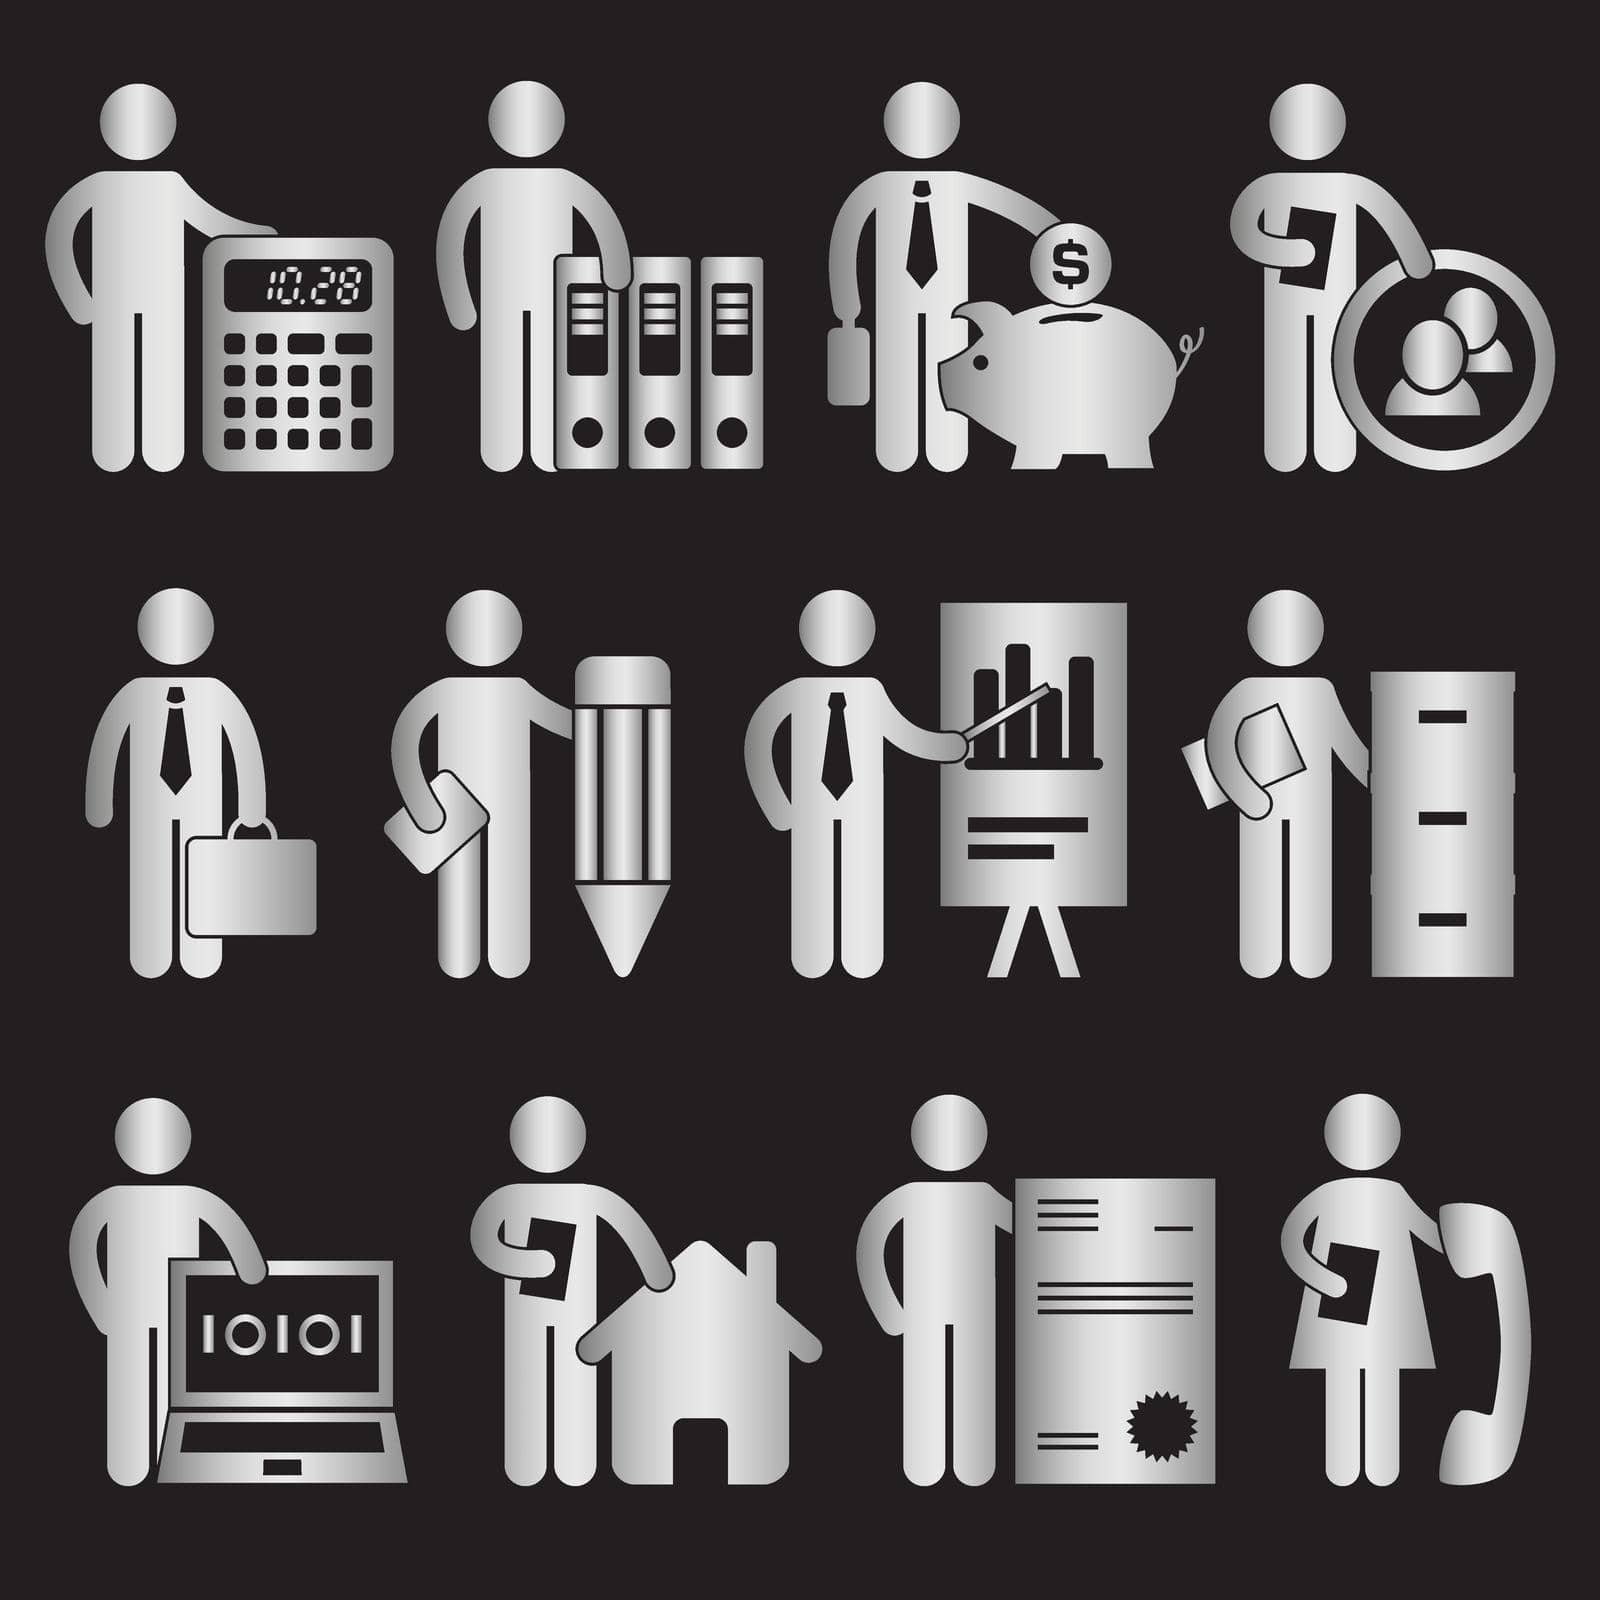 you can use Silver business activity matchstick men vector to design banners, posters, backgrounds, ...etc.